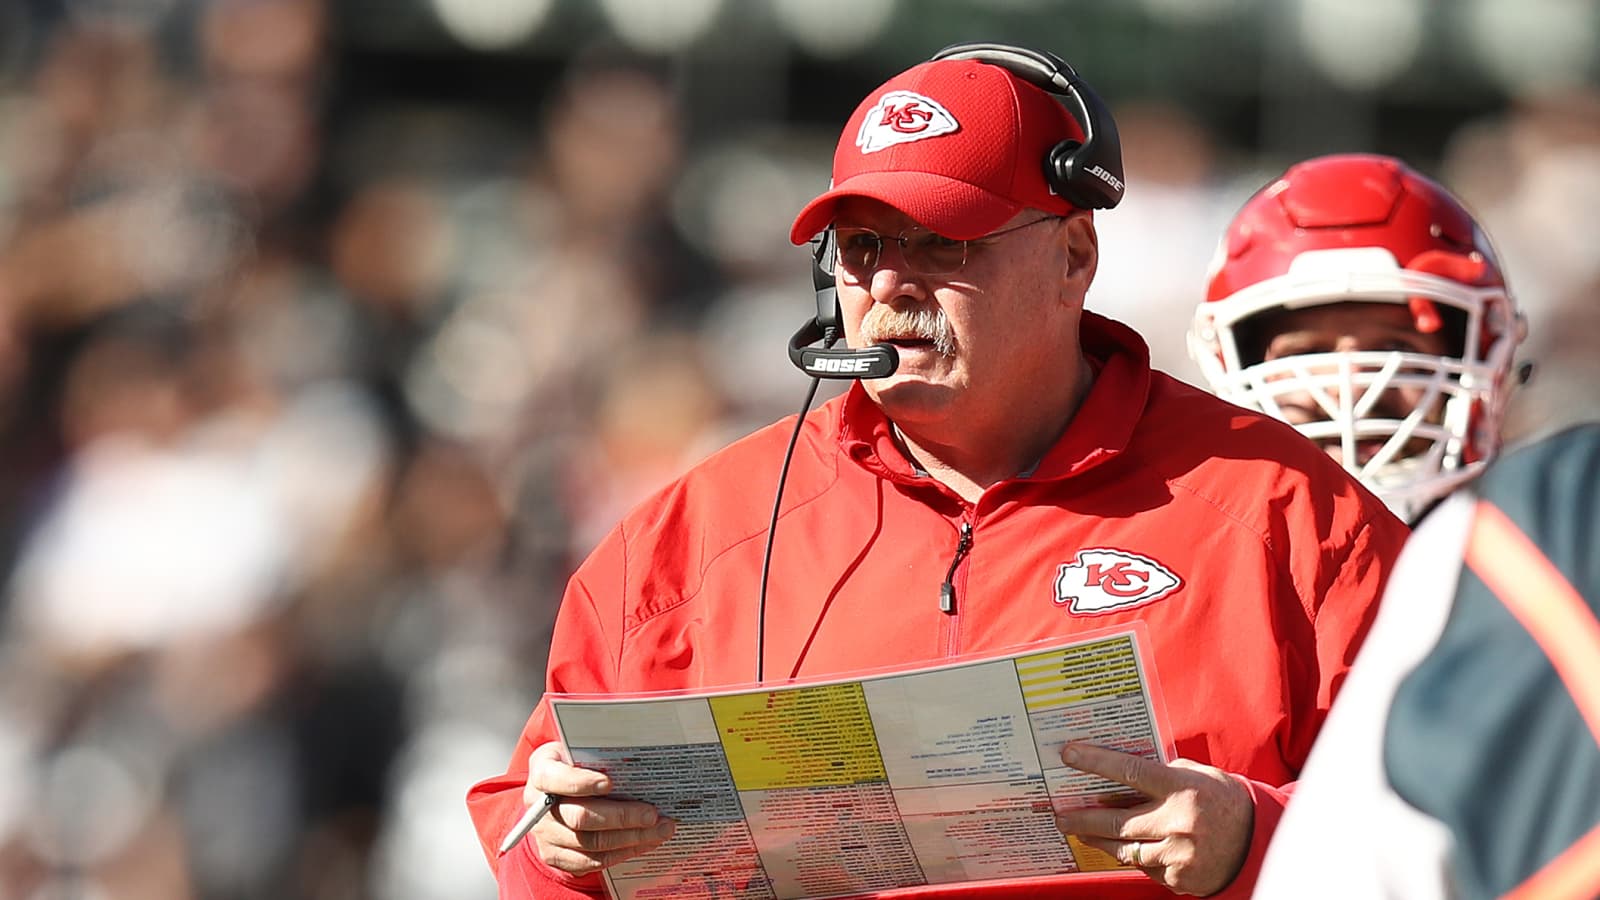 Chiefs' coach Andy Reid still has the car his dad bought